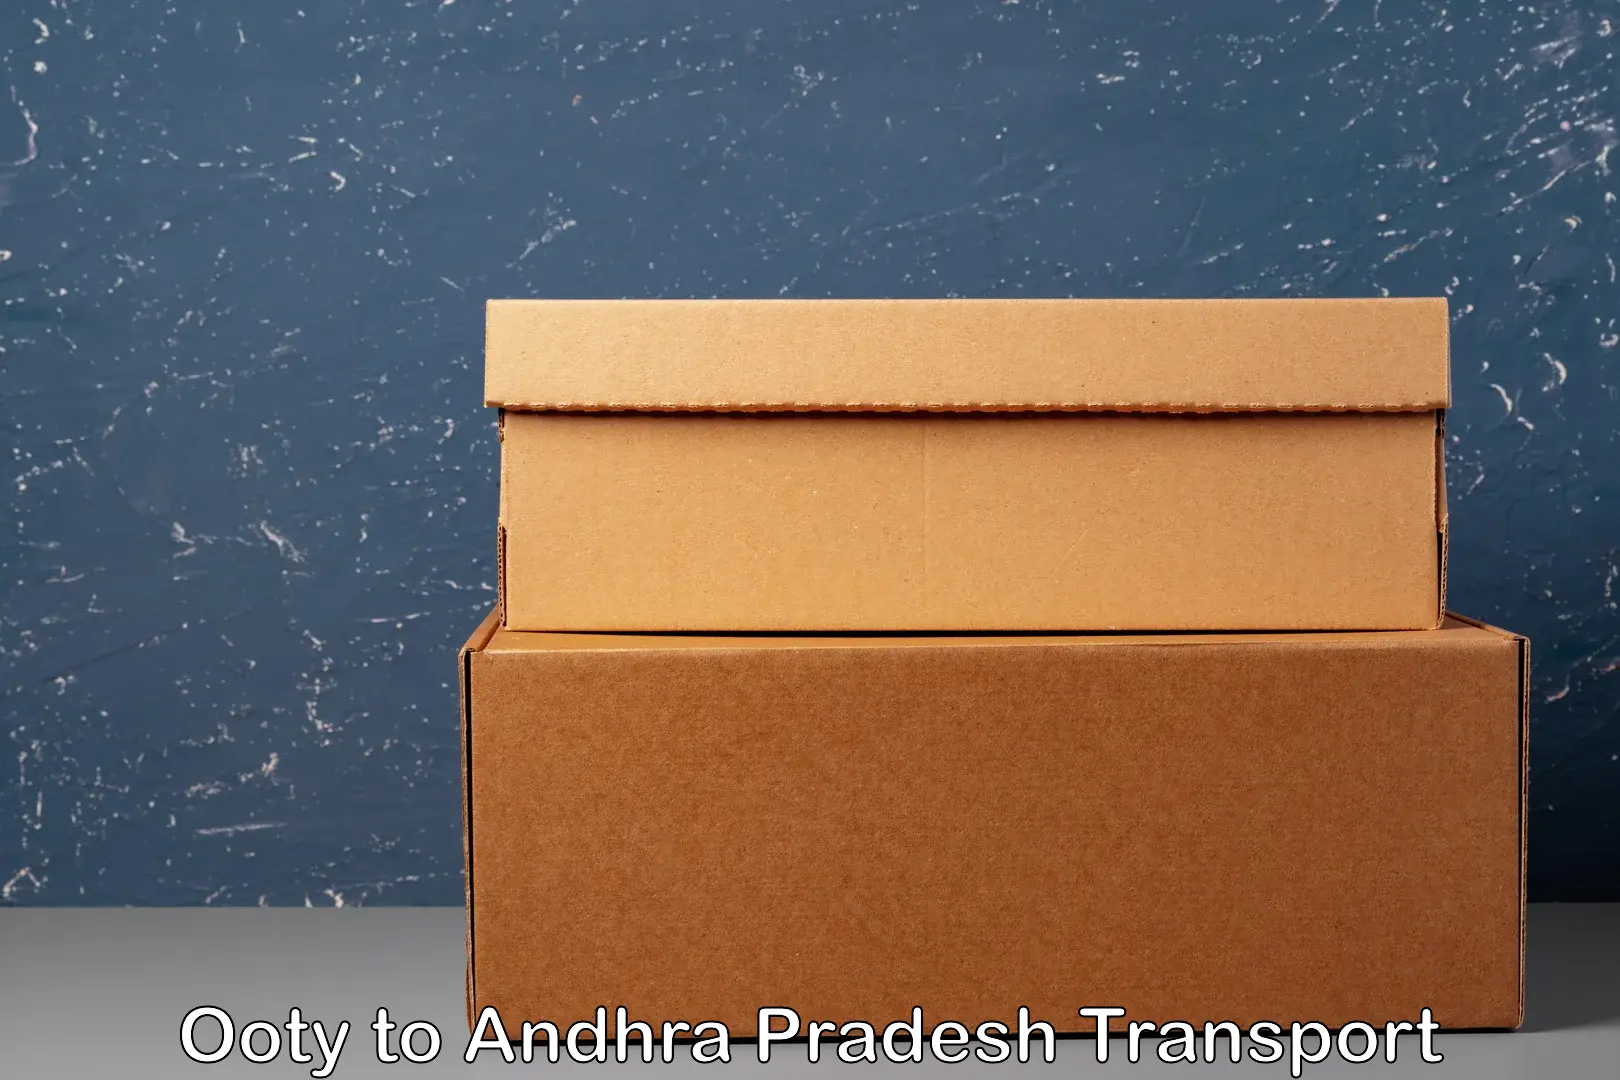 Inland transportation services Ooty to Andhra Pradesh